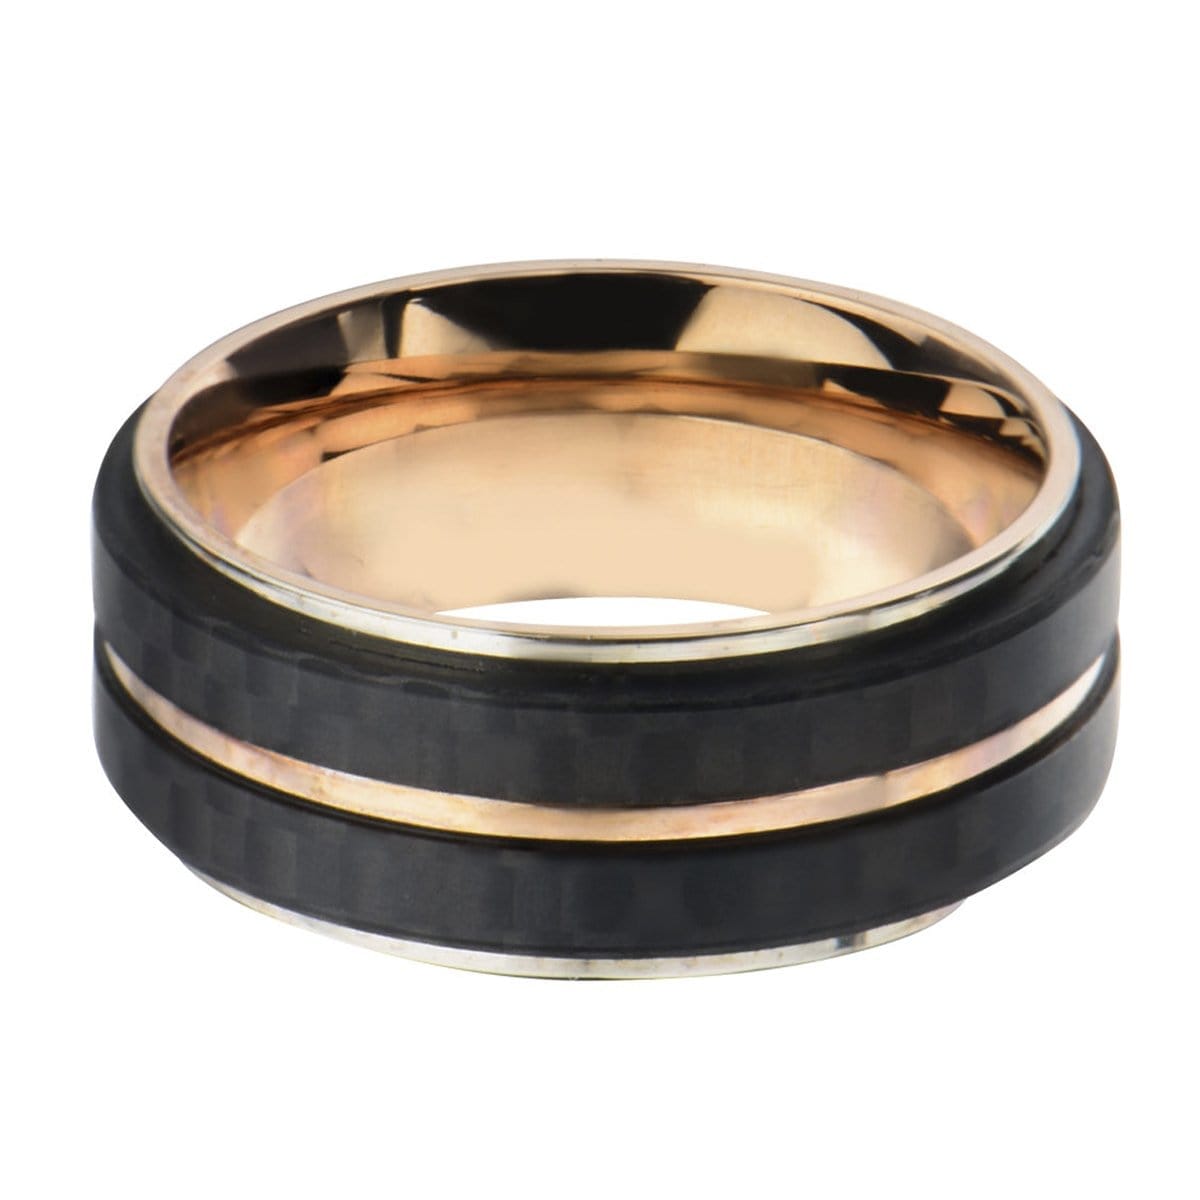 INOX JEWELRY Rings Rose Tone Stainless Steel Double Black Carbon Fiber Stripe Band Ring